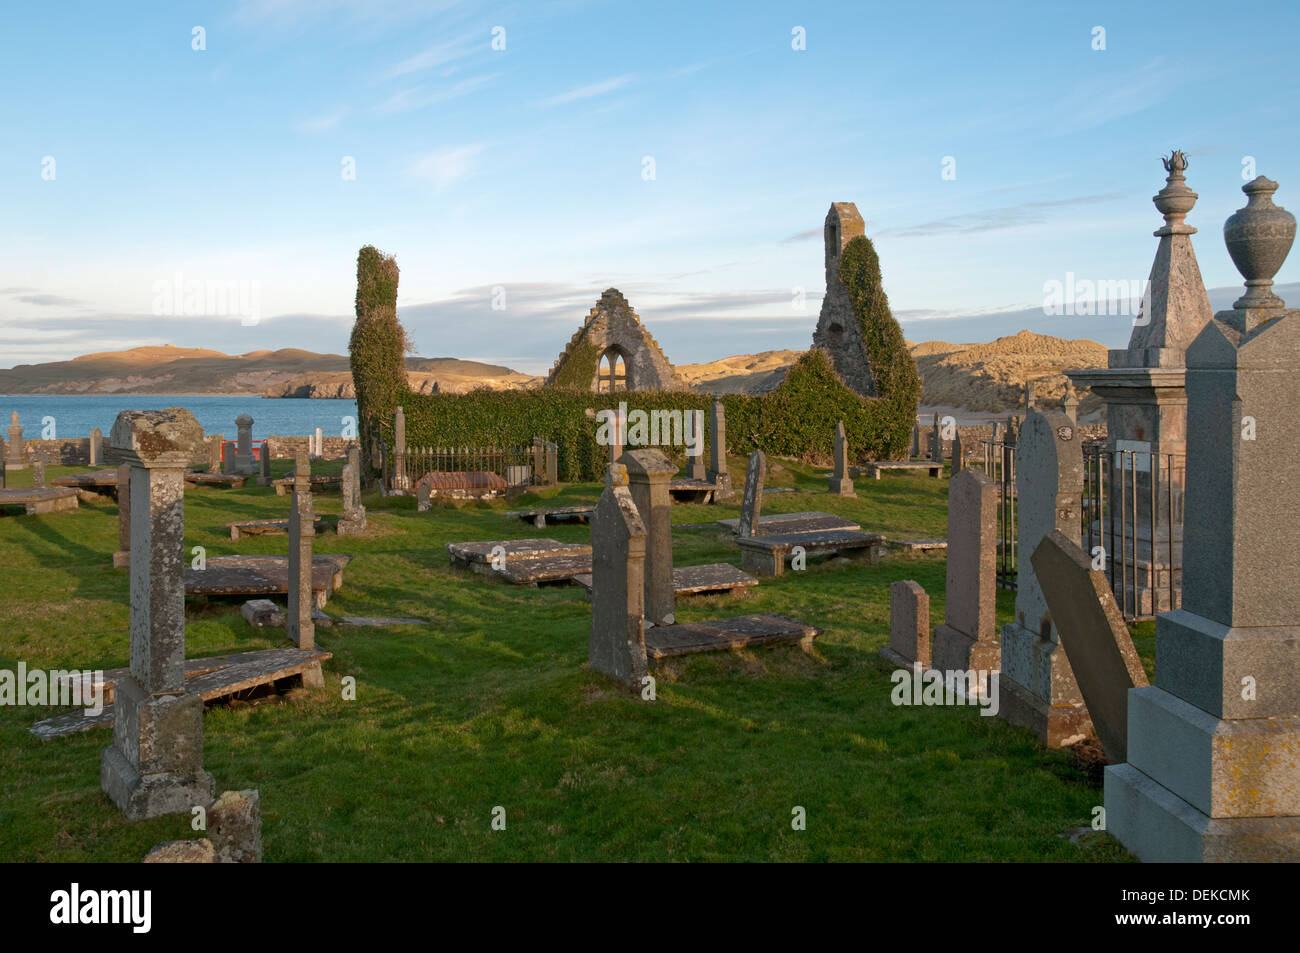 The old church (dated 1619) and graveyard at Balnakeil near Durness, Sutherland, Scotland, UK. Stock Photo